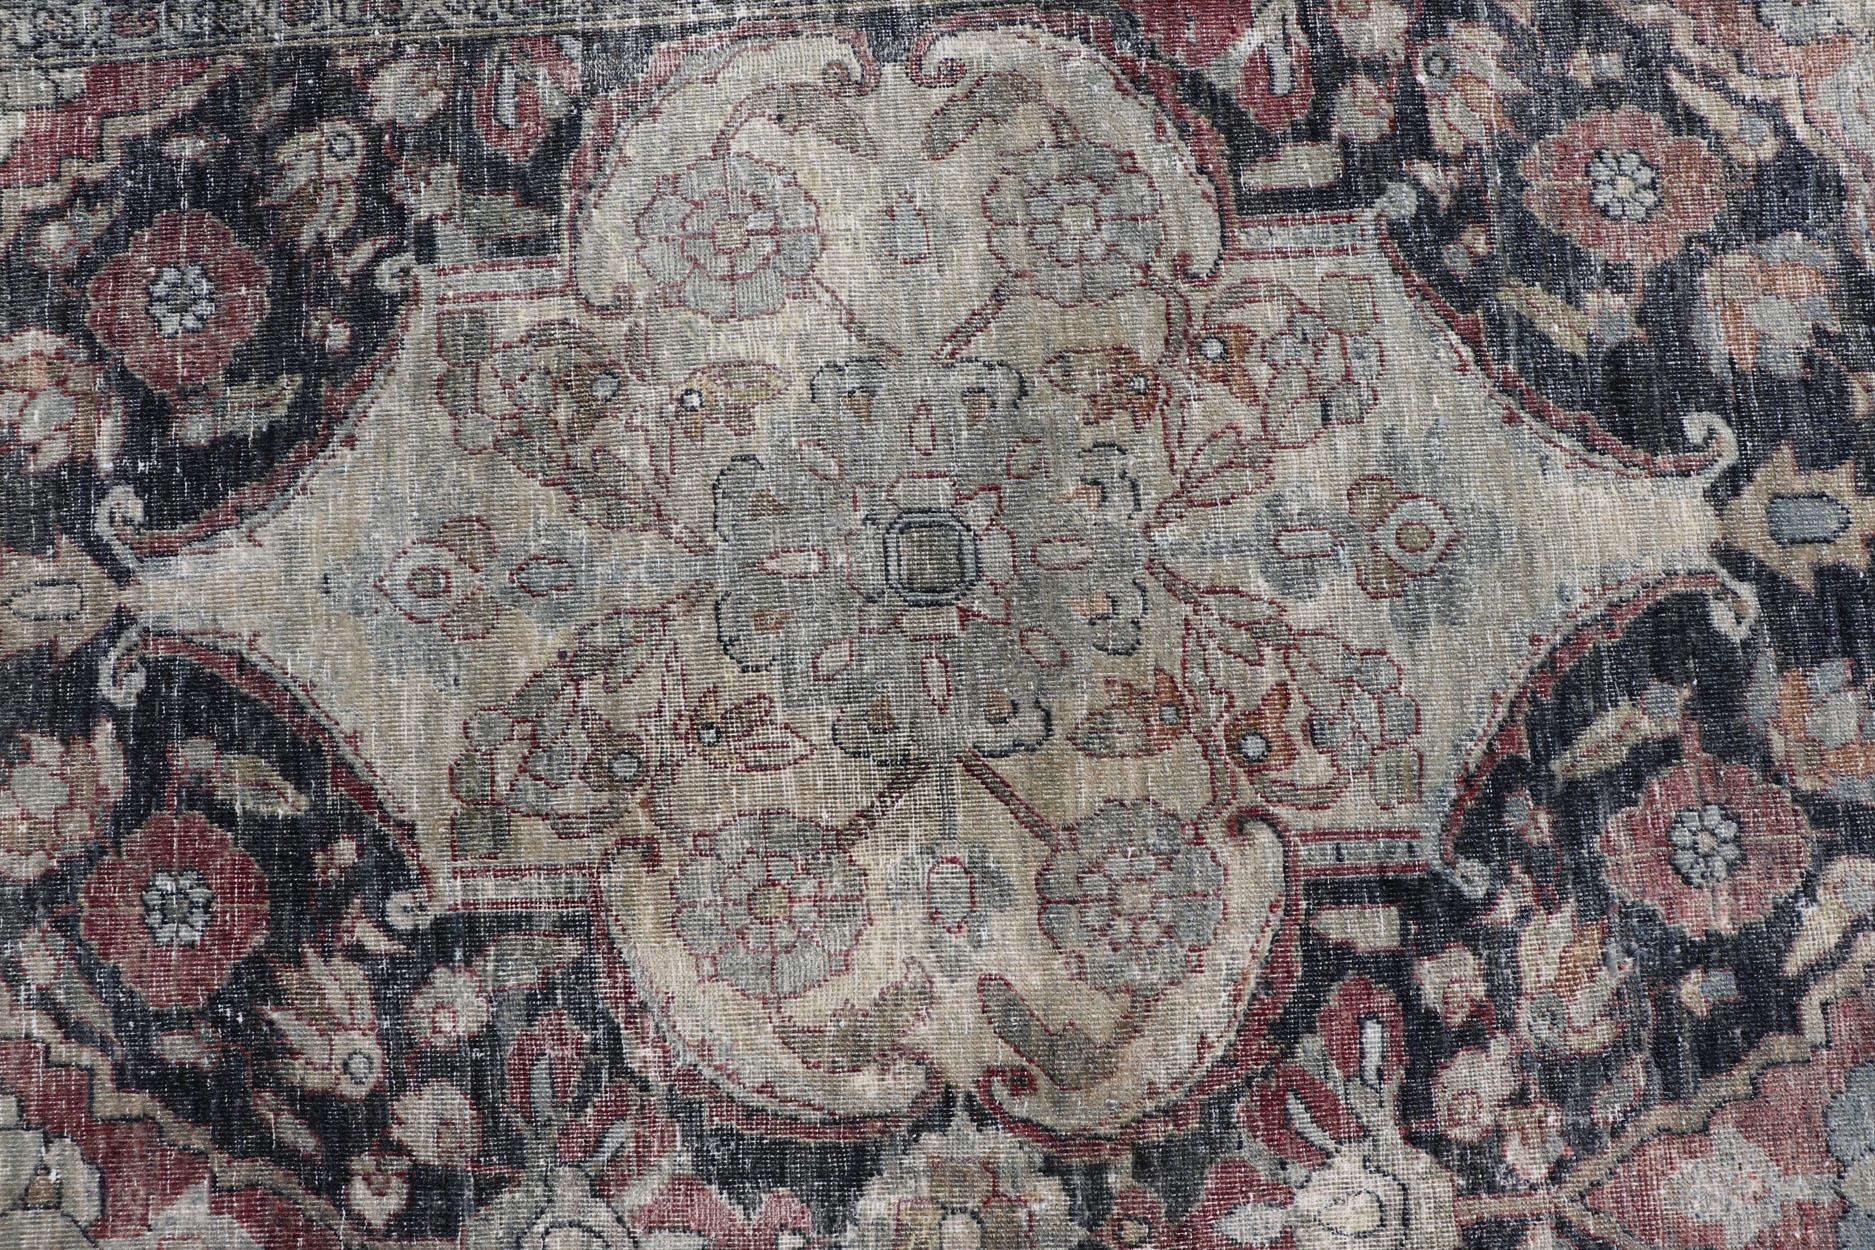 Antique Destressed Persian Yazd Rug in Charcoal, Copper, Warm Gray, Taupe & Rose For Sale 5